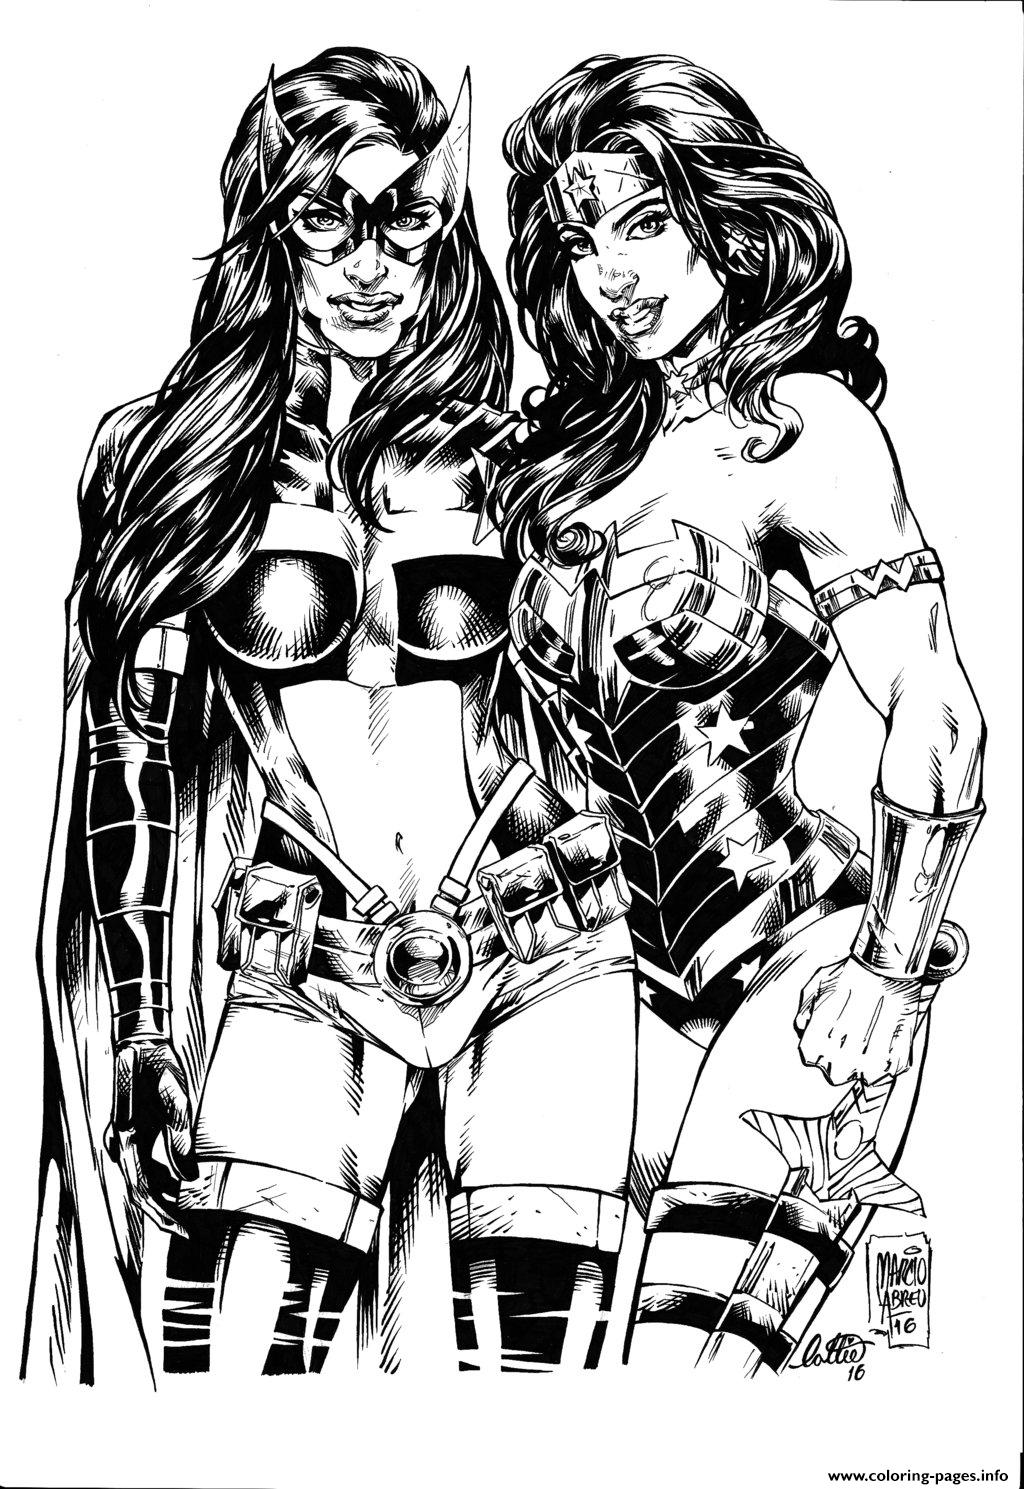 Huntress Catwoman Wonder Woman Inked By Lottiefrancis coloring